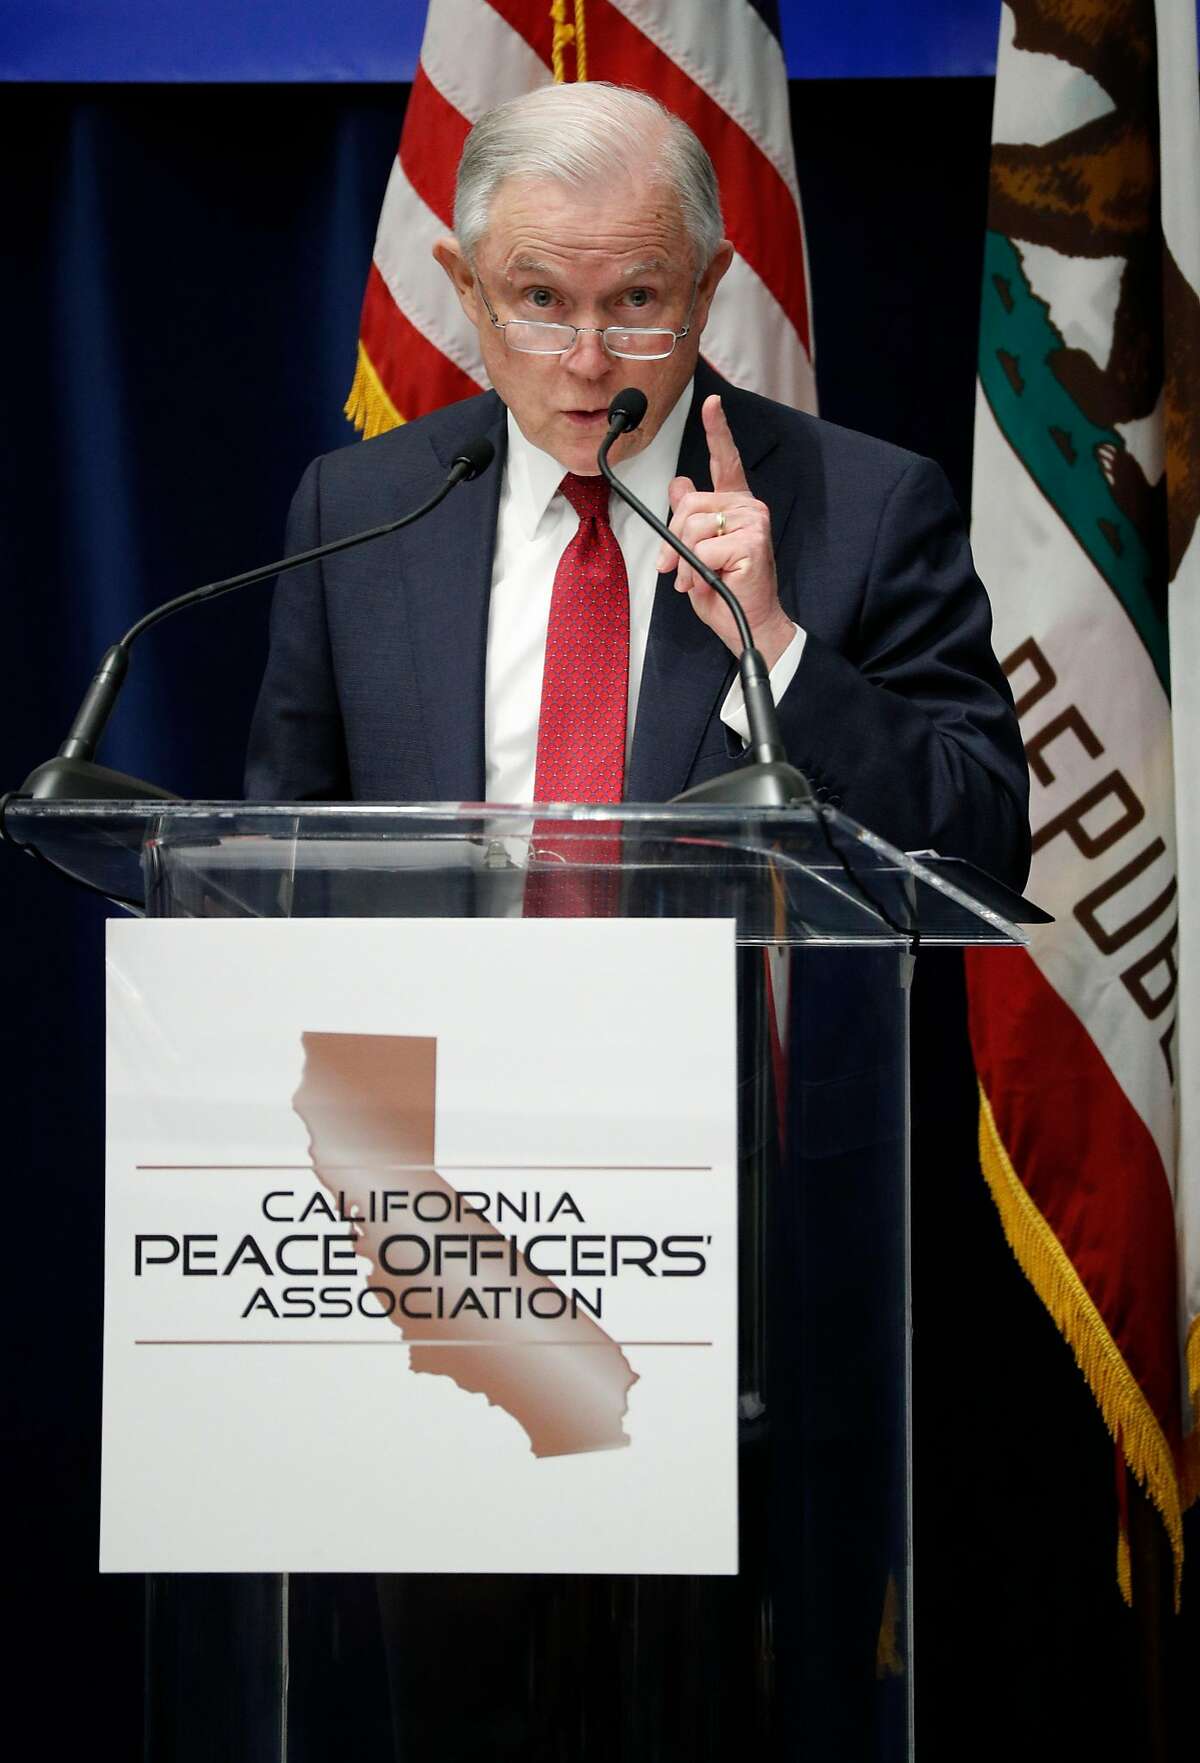 U.S. Attorney General Jeff Sessions delivers remarks to the California Peace Officer's Association at the Kimpton Sawyer Hotel in Sacramento, Calif., on Wed. Mar. 7, 2018.